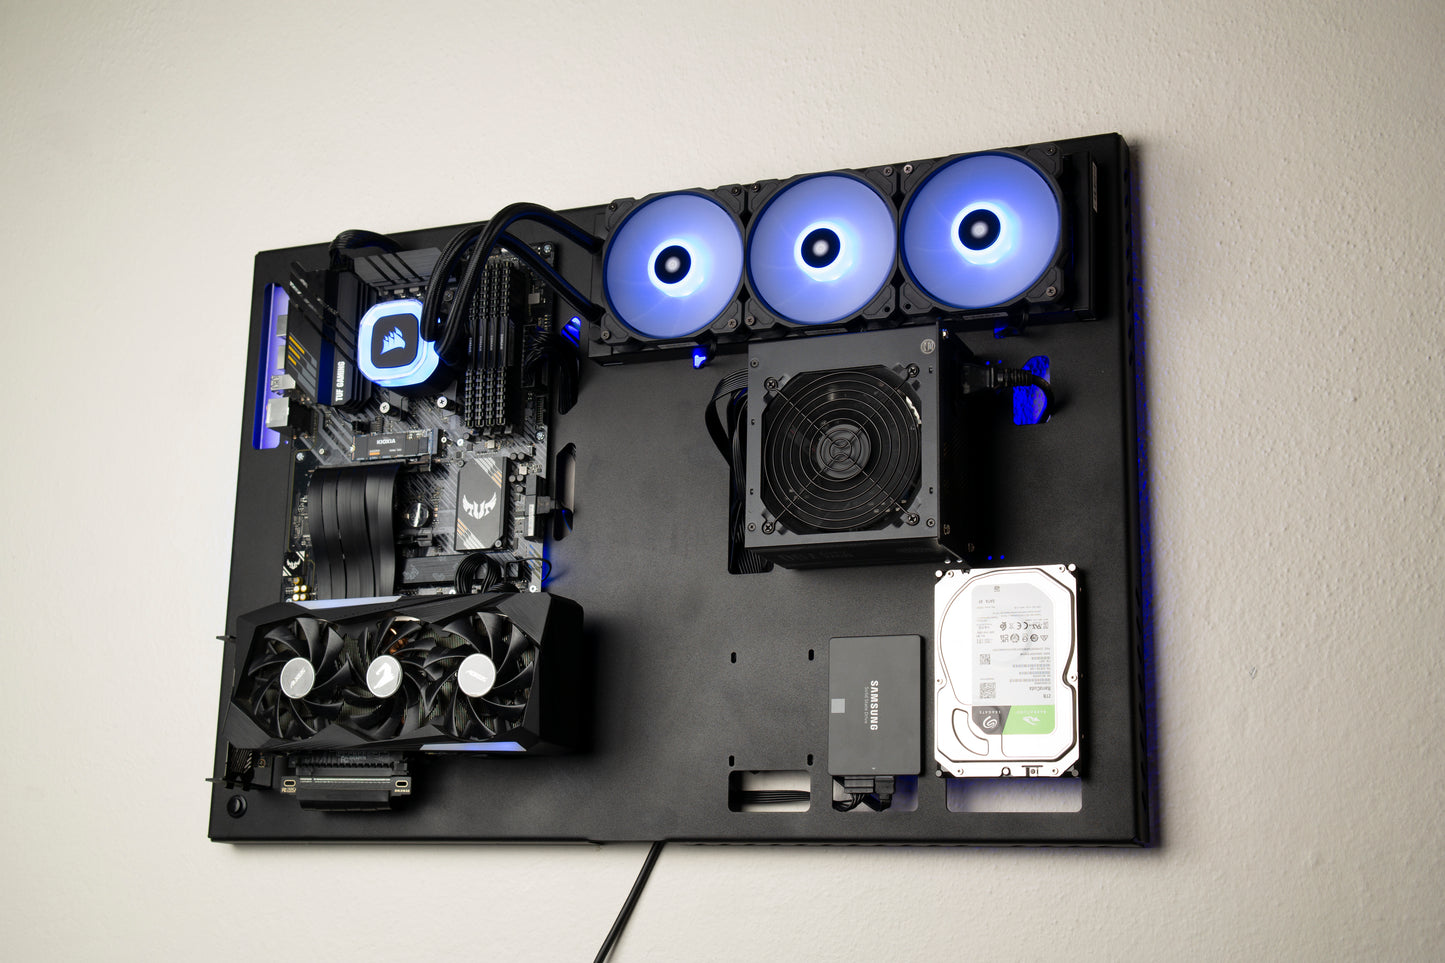 Exclusive Wall Computer Enclosure - Handcrafted for Performance, Computer Wall Mount